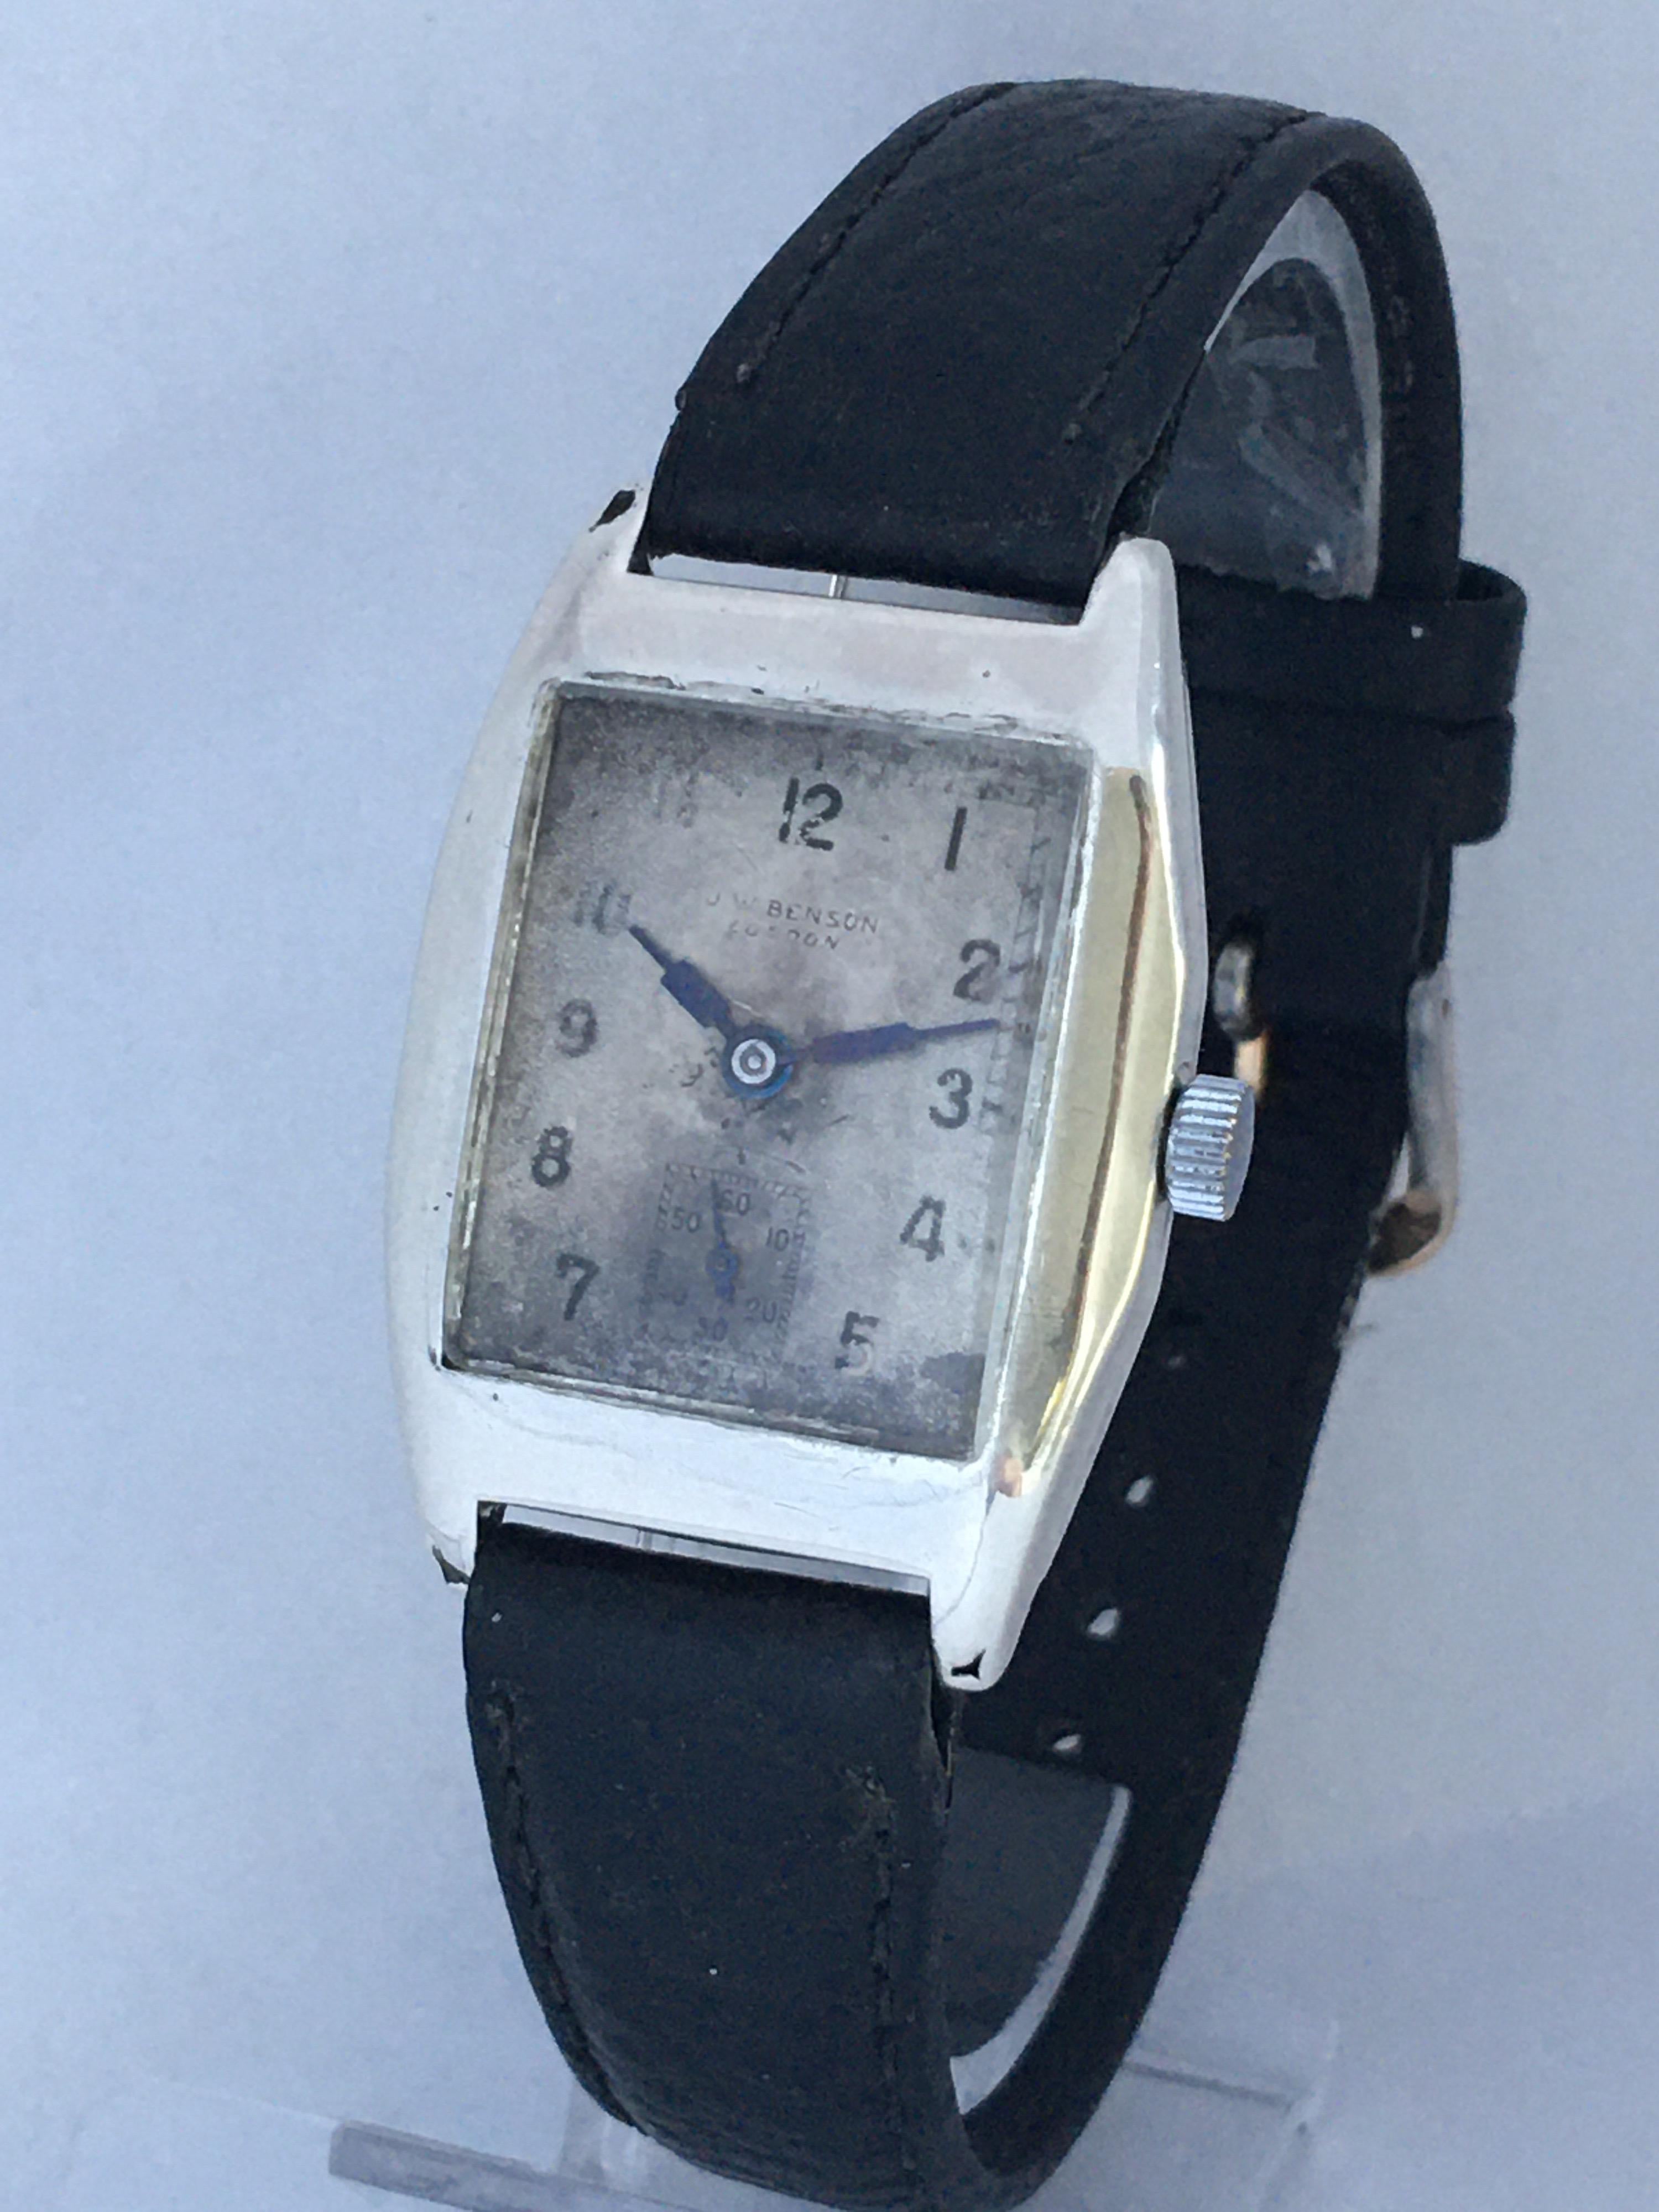 This beautiful pre-owned vintage hand winding watch is in good working condition and it is running well. It is recently been serviced. Visible signs of ageing and wear with light scratches on the glass and on the watch case as shown. The silvered